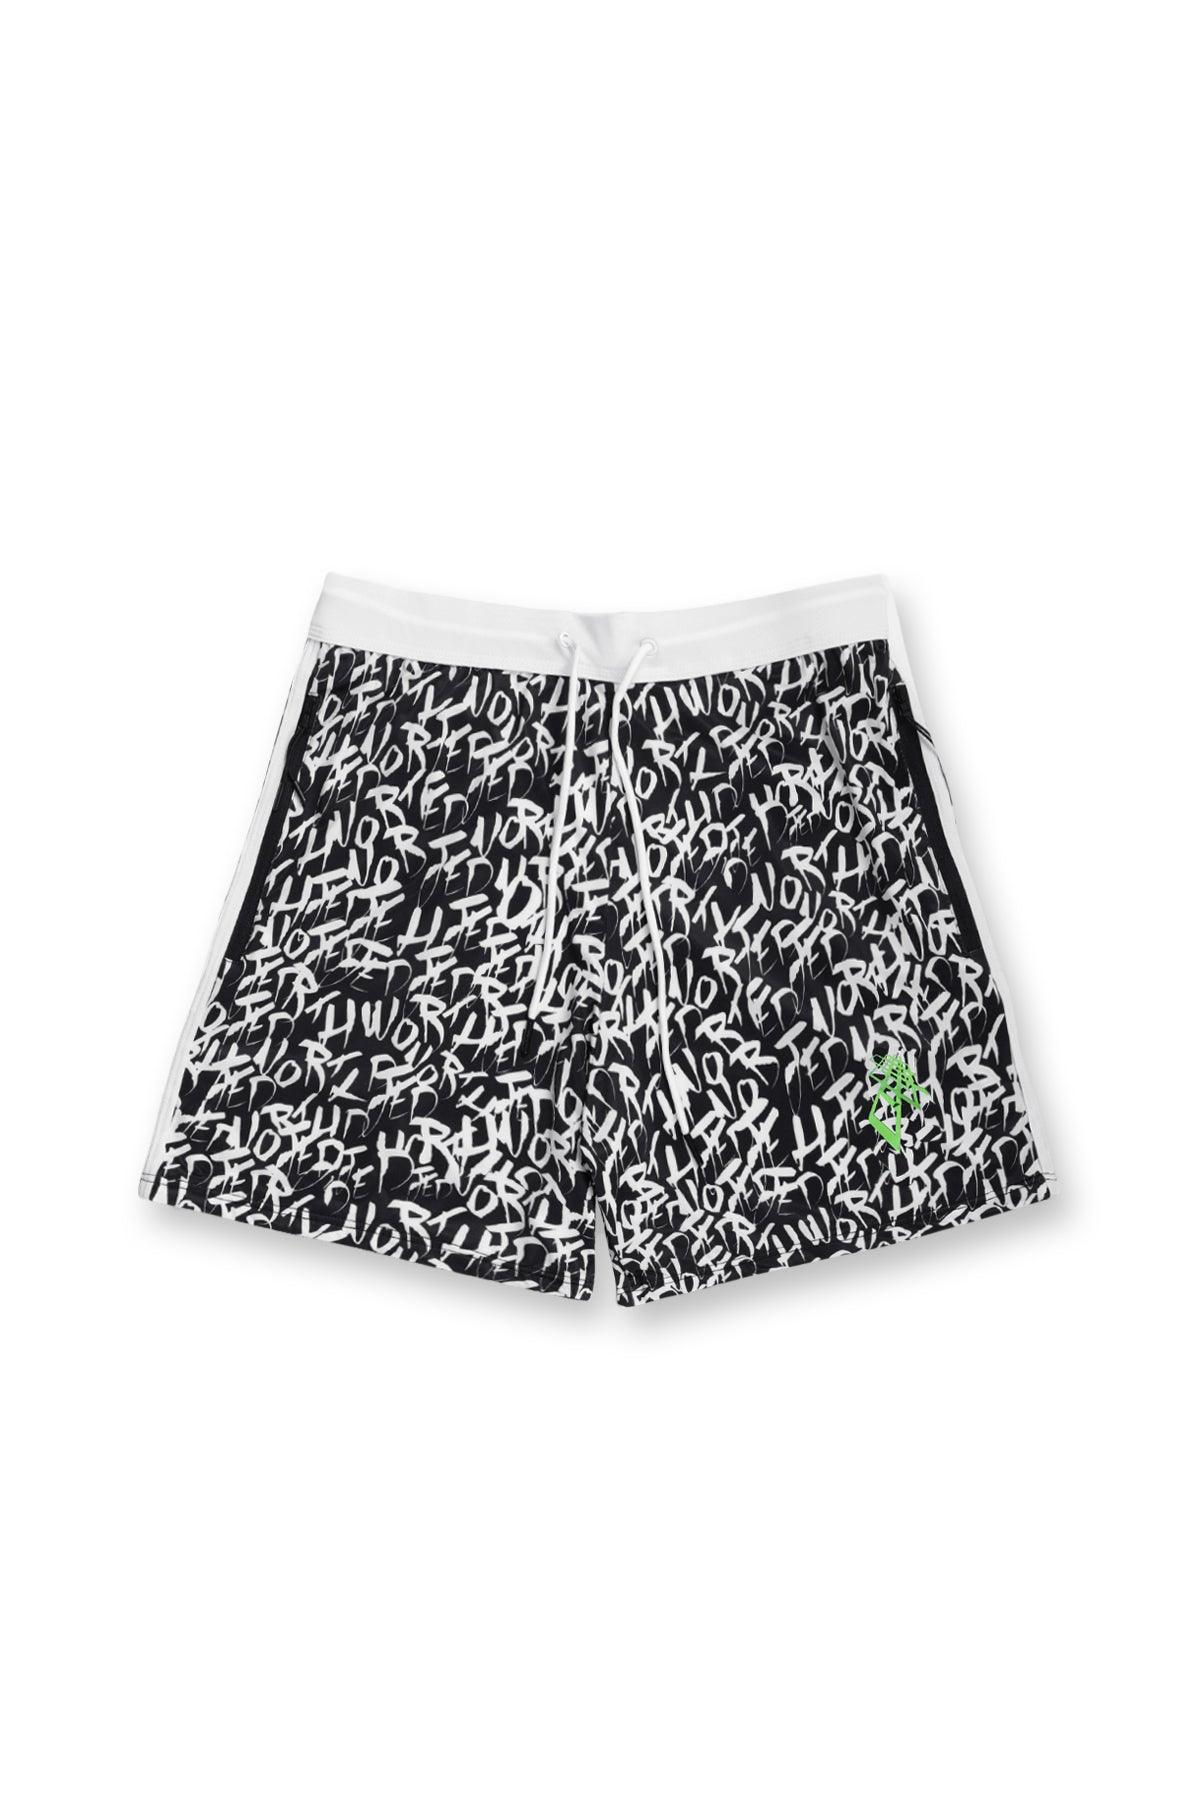 Ace Graphic Casual 5" Shorts 2.0 - Jed North Chaos - Jed North